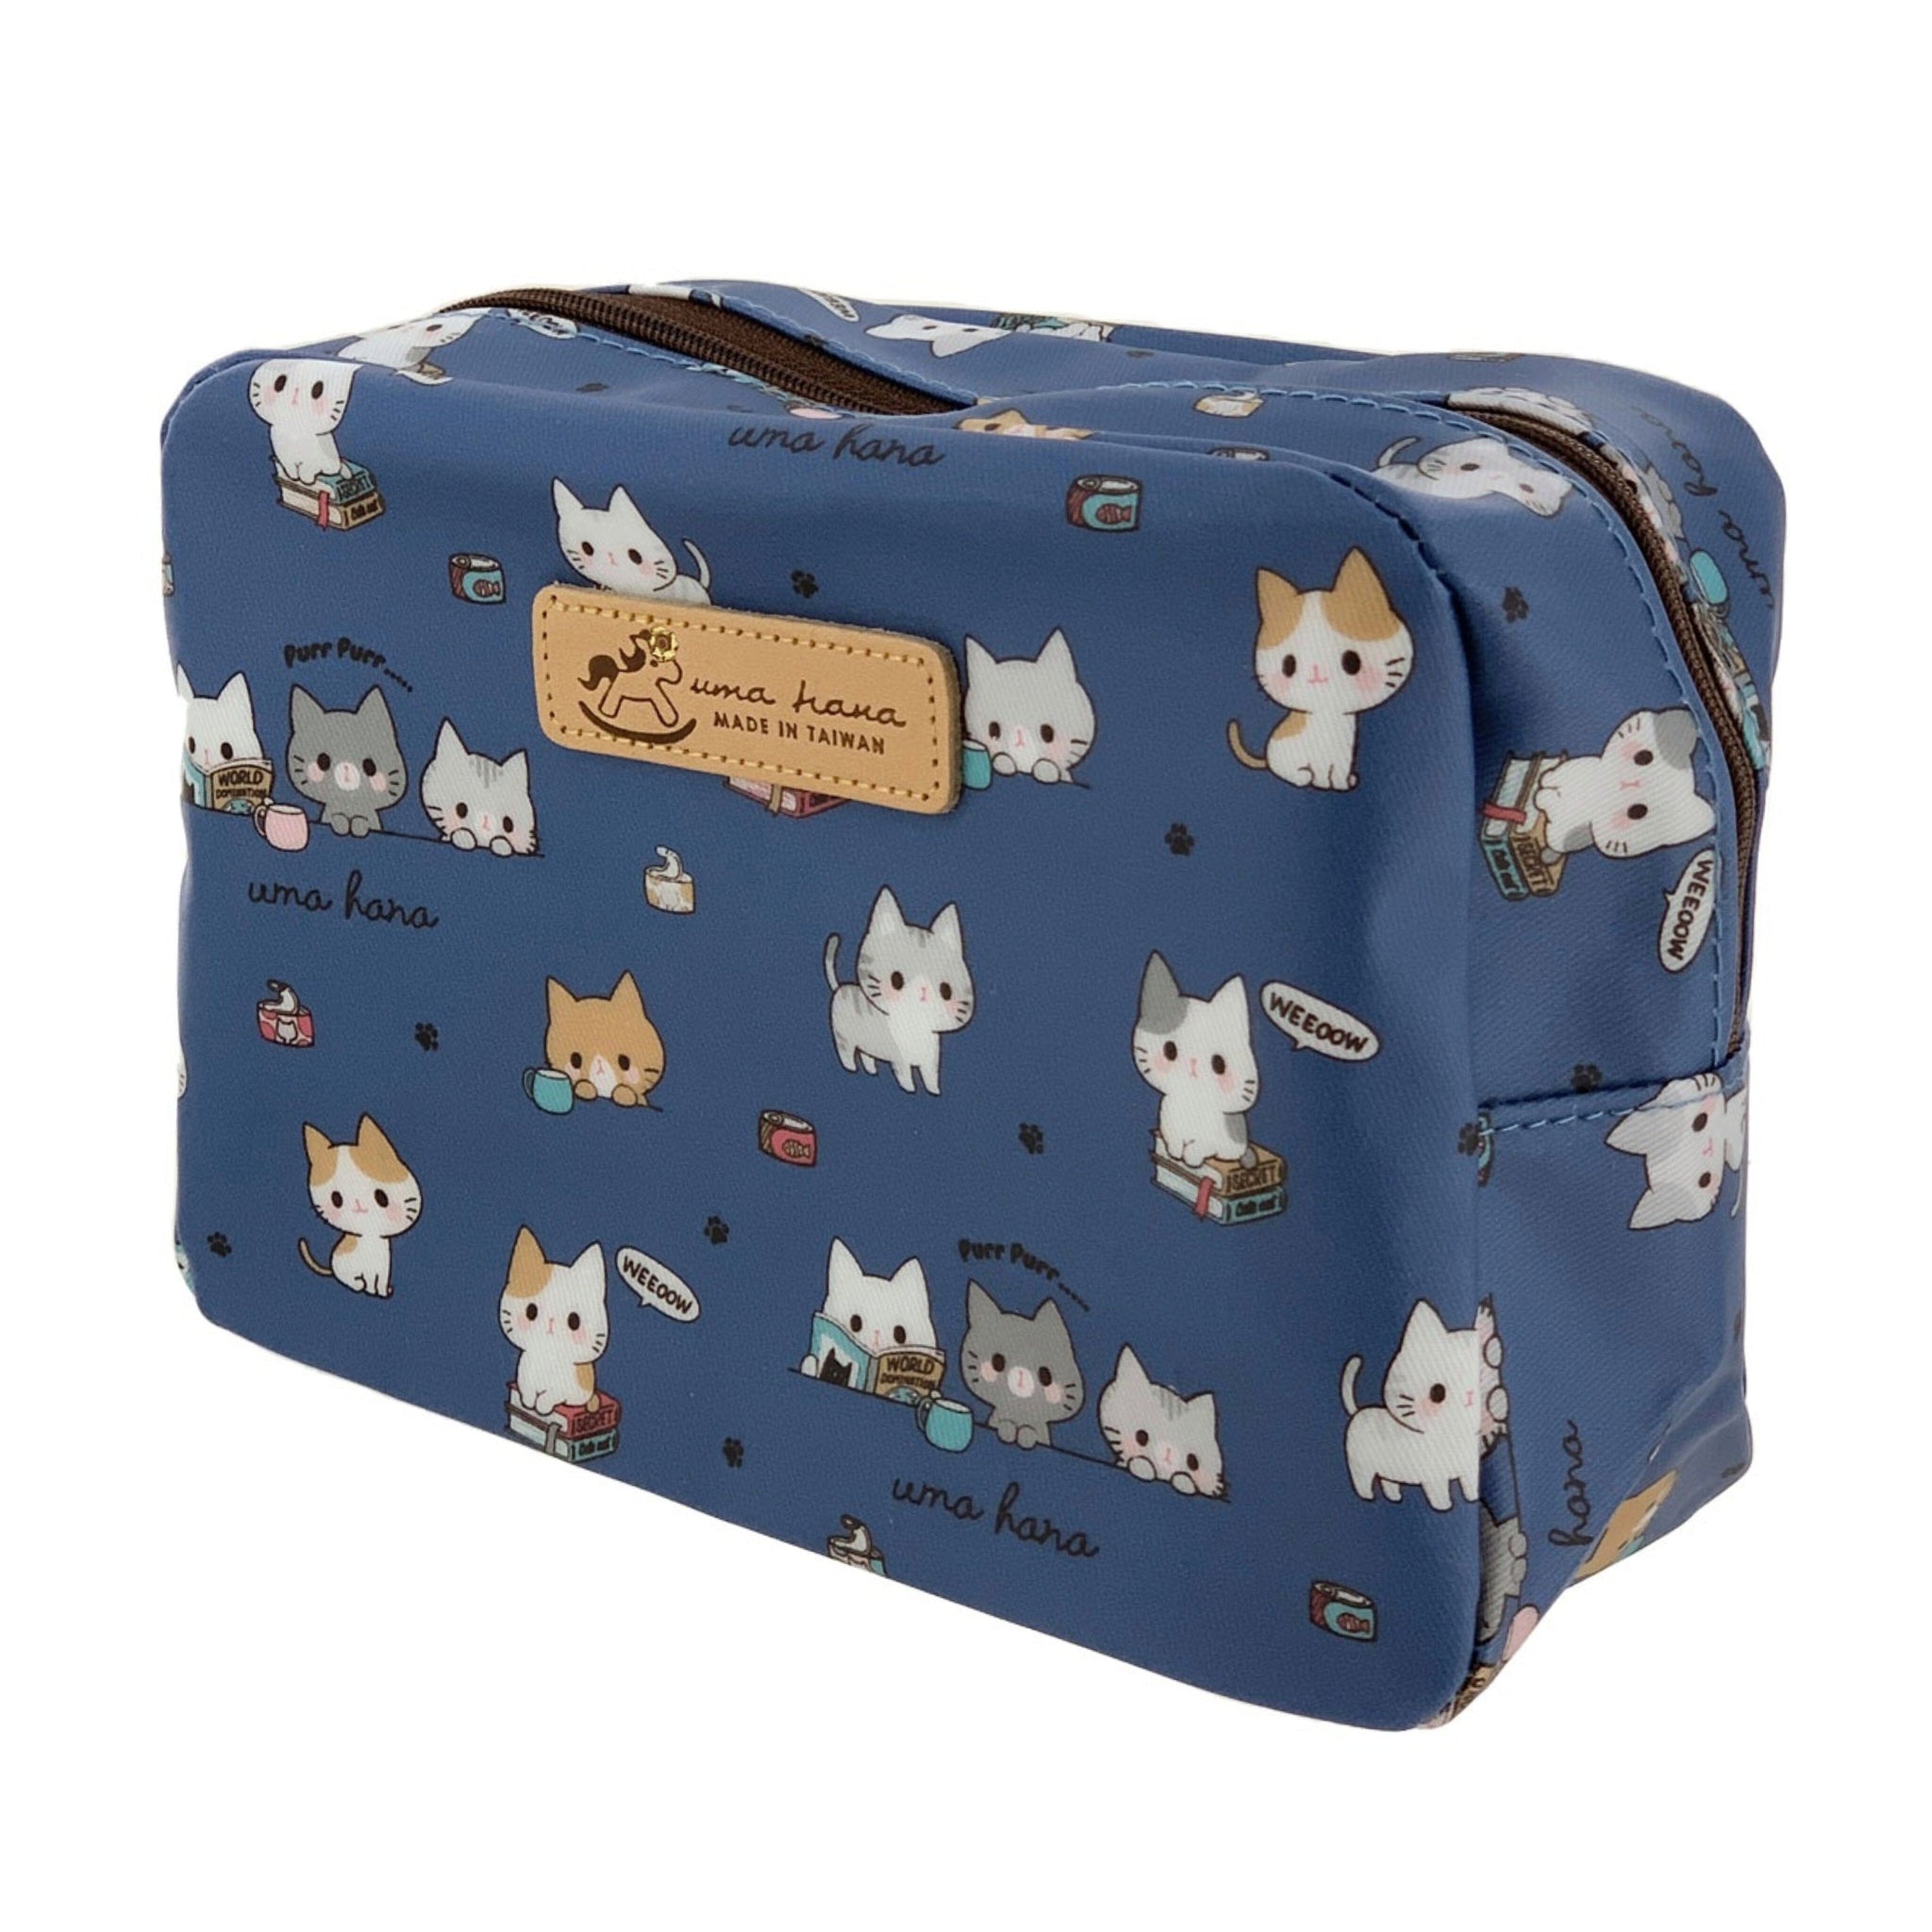 Blue Meow Cat Cube Cosmetic Bag